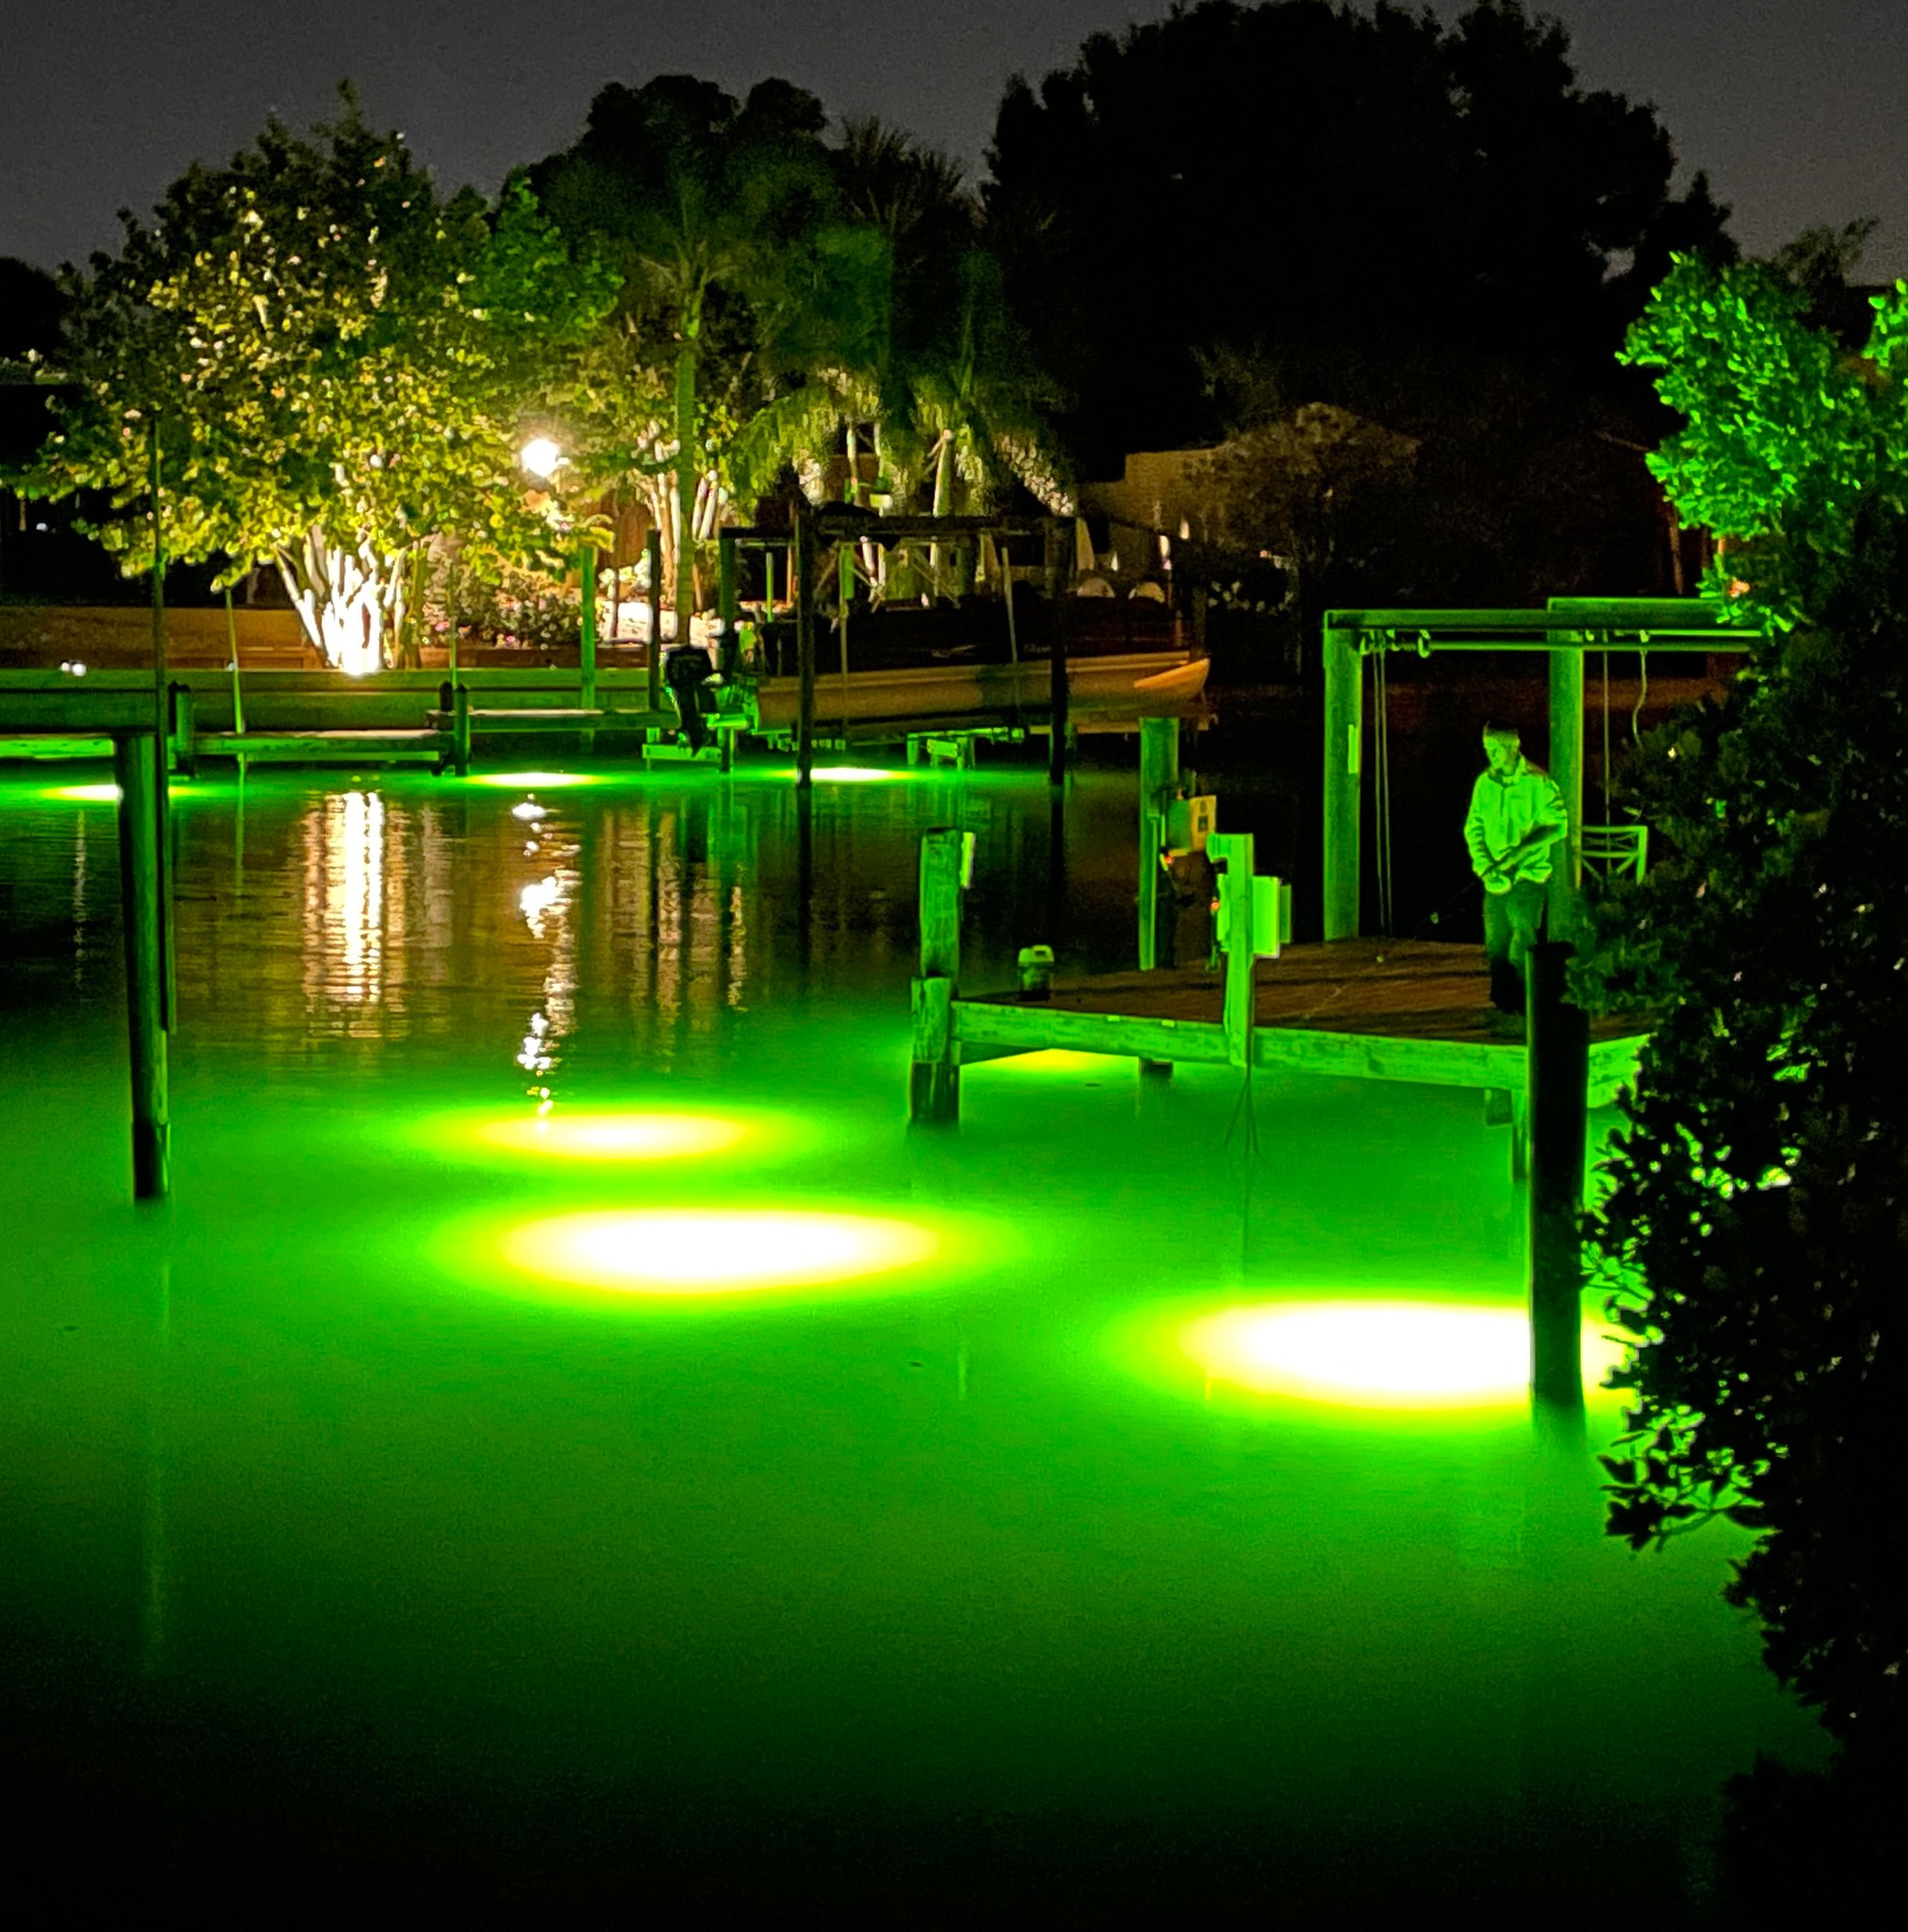 https://underwaterfishlight.com/wp-content/uploads/2022/07/Can-You-Use-Fish-Lights-in-Miami.jpg